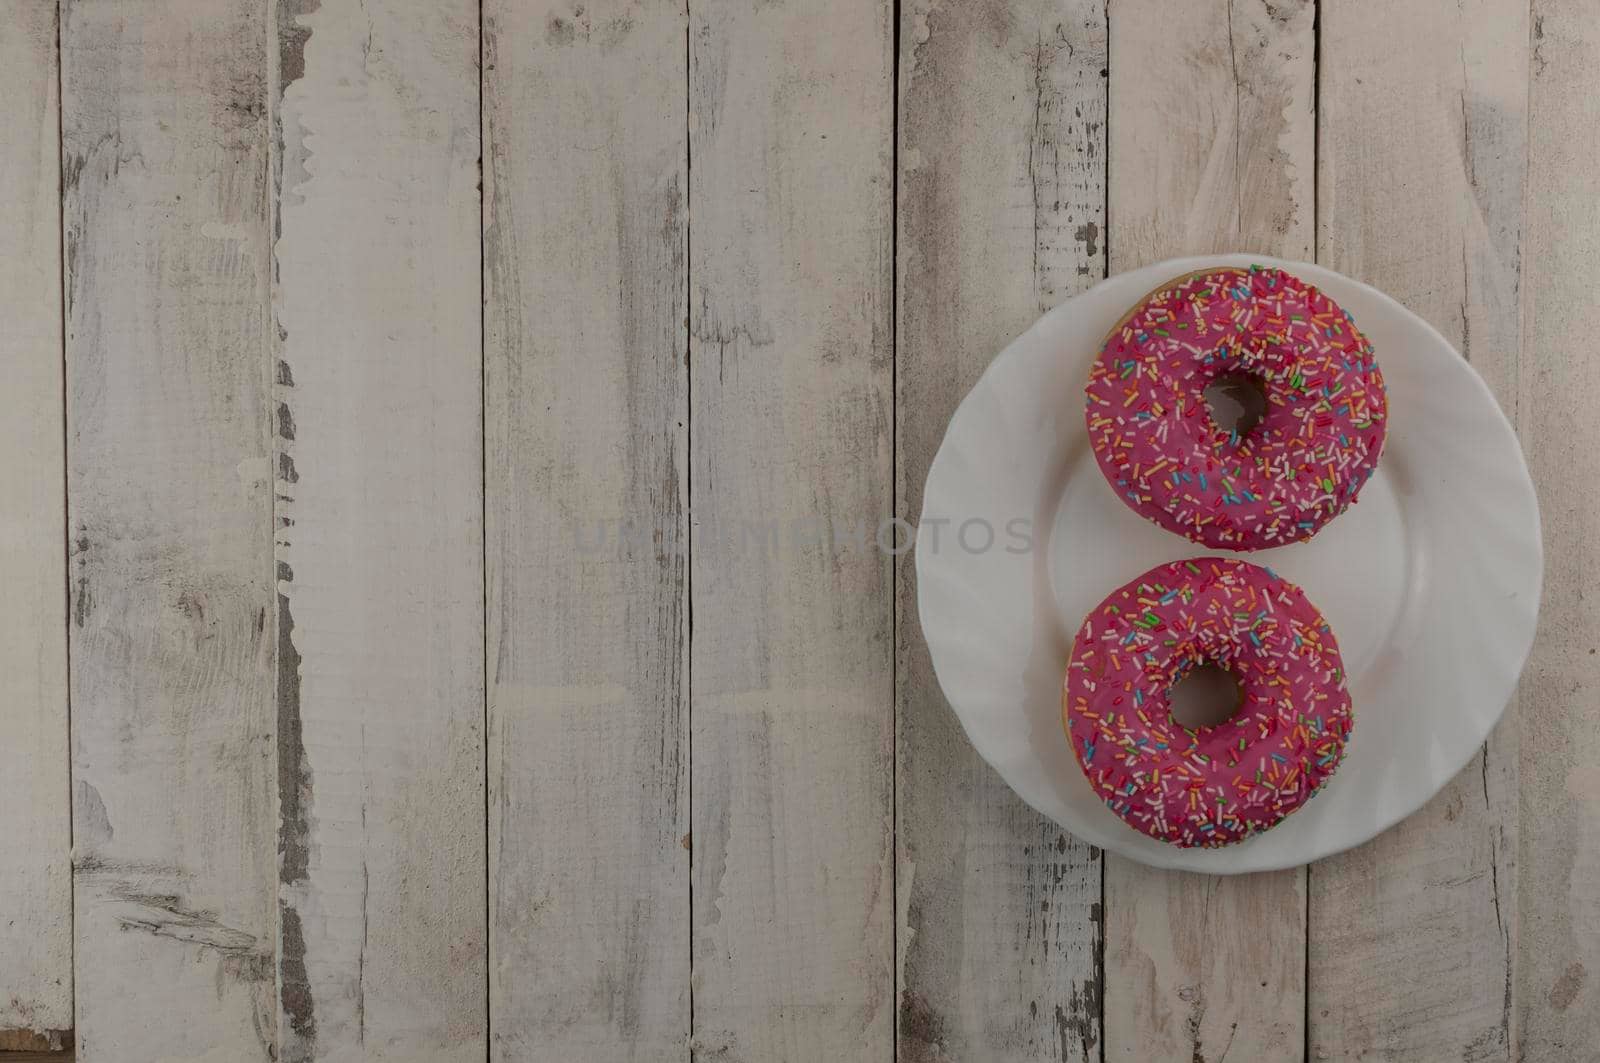 Donut on a plate and on a wooden table. Photo of sweets. Top view. Copy space. Mock-up